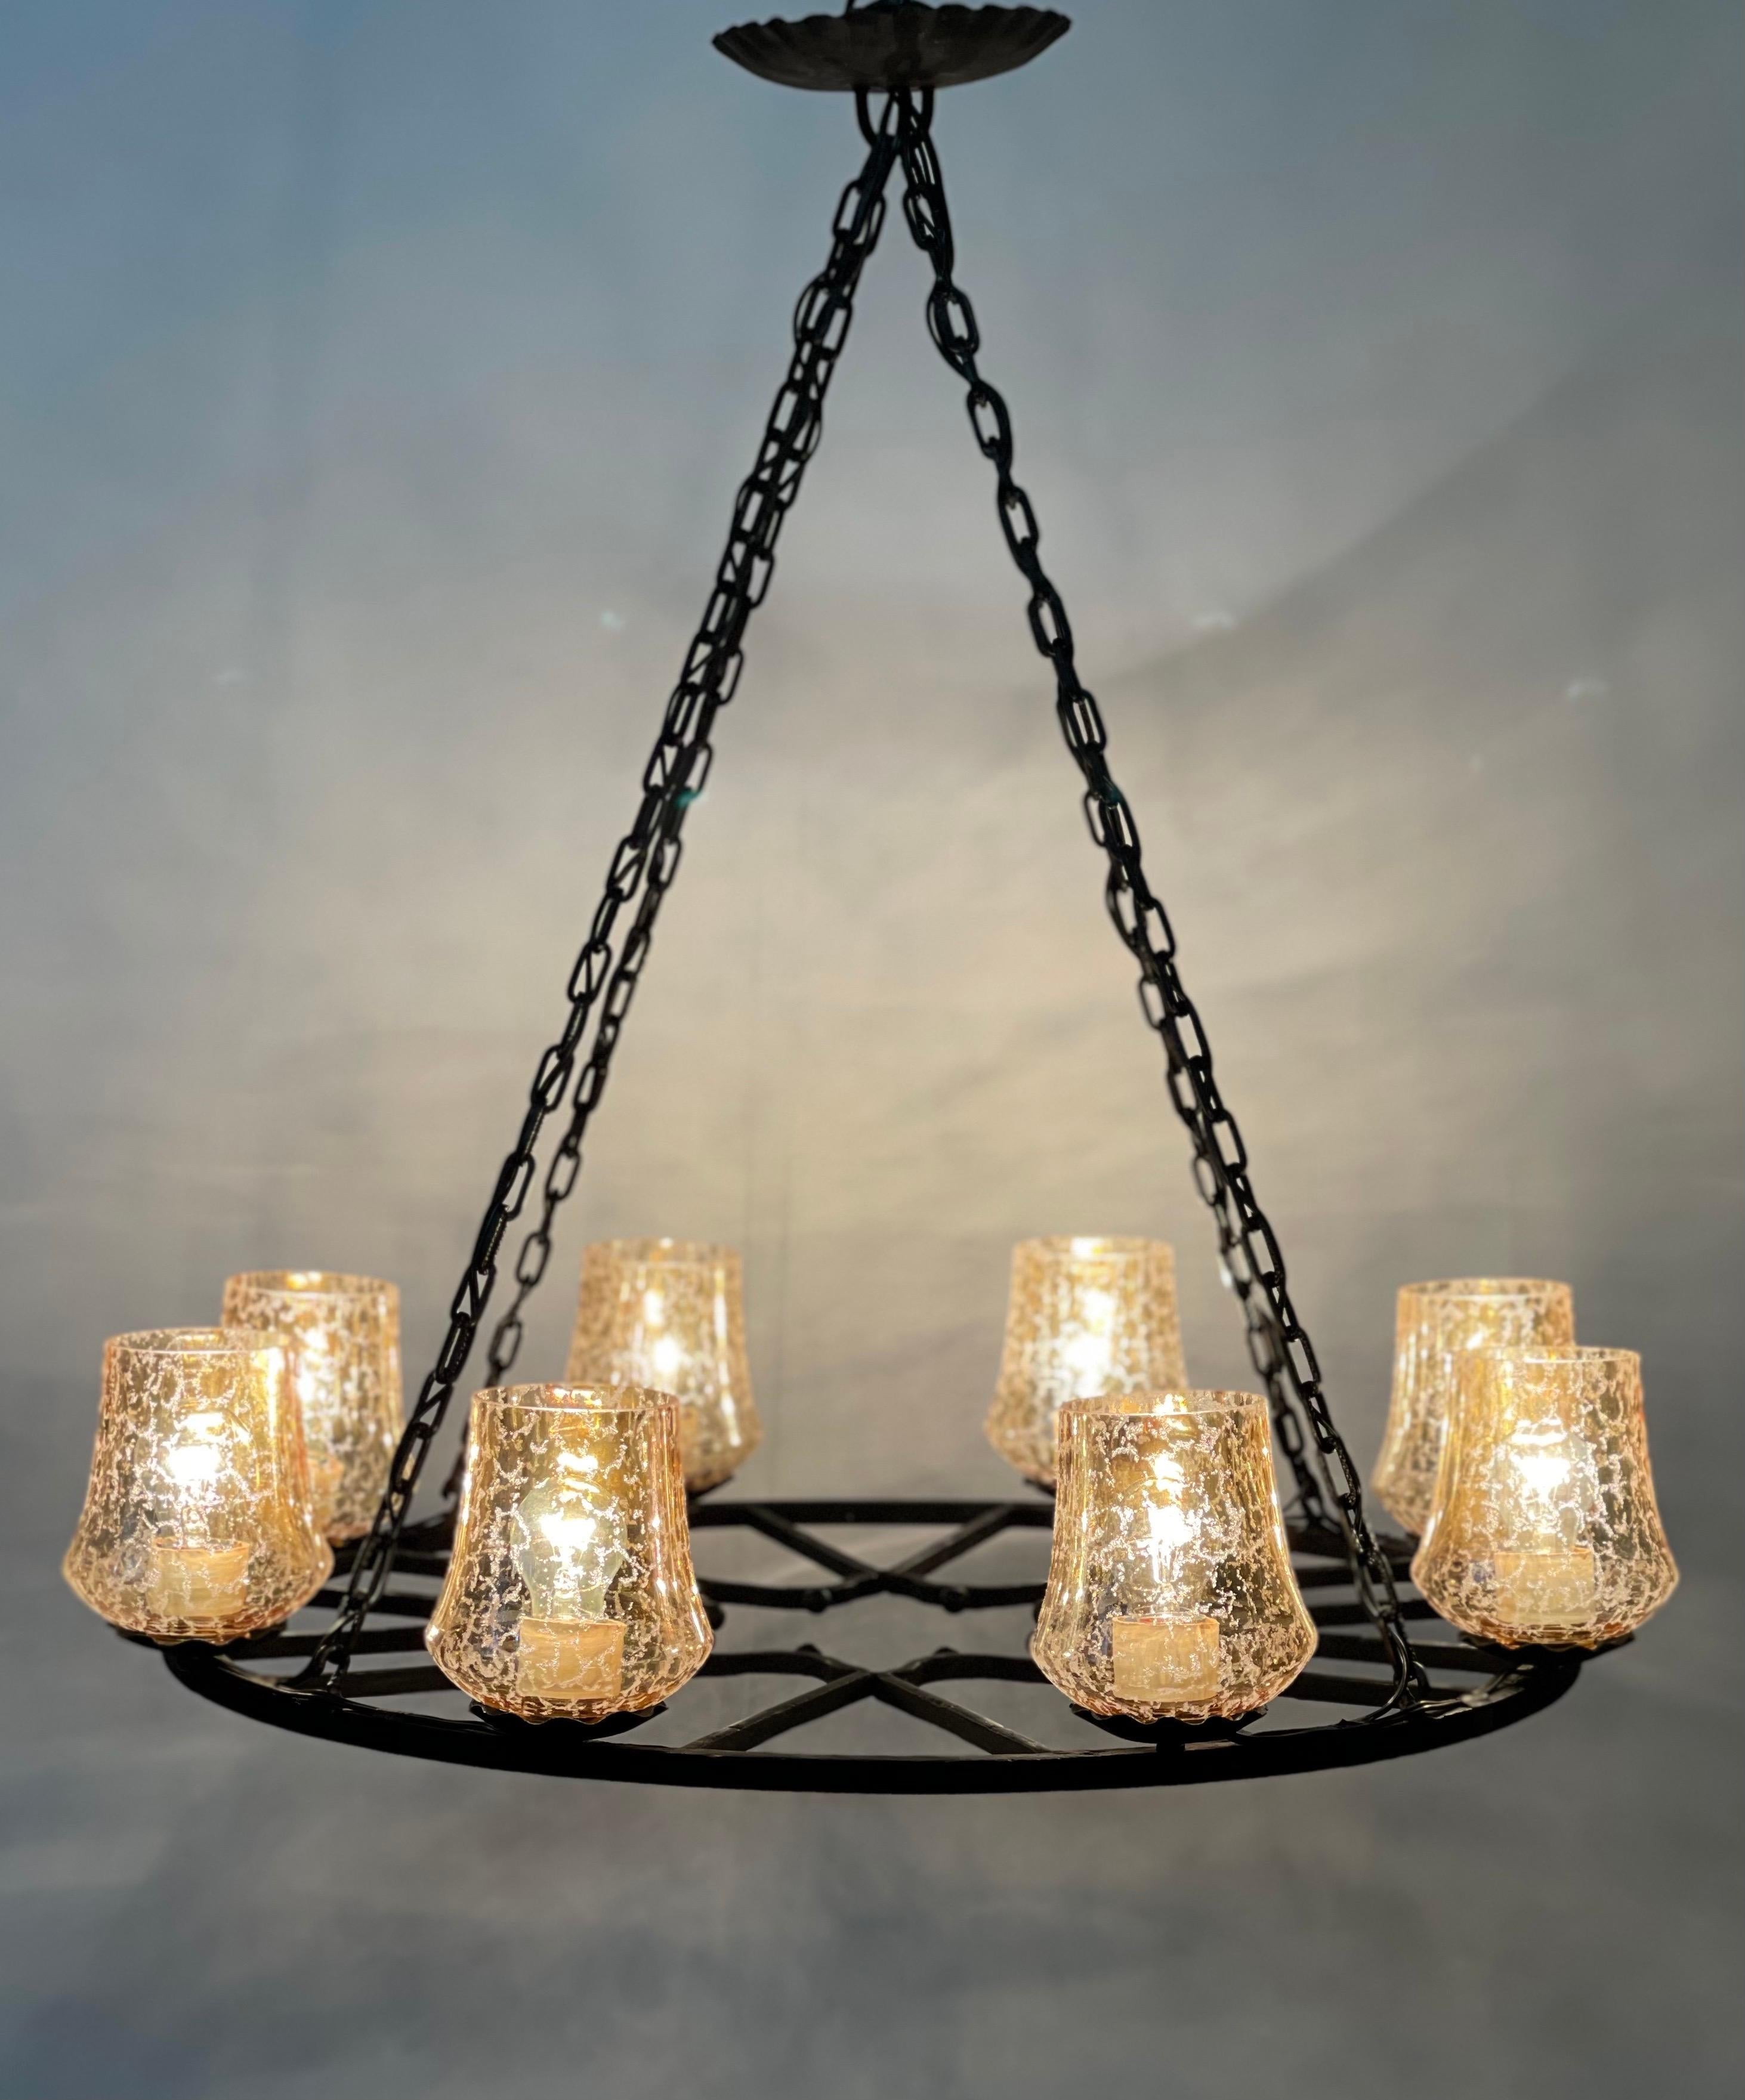 Mid-20th Century French Wrought Iron and Amber Glass Chandelier, circa 1950s